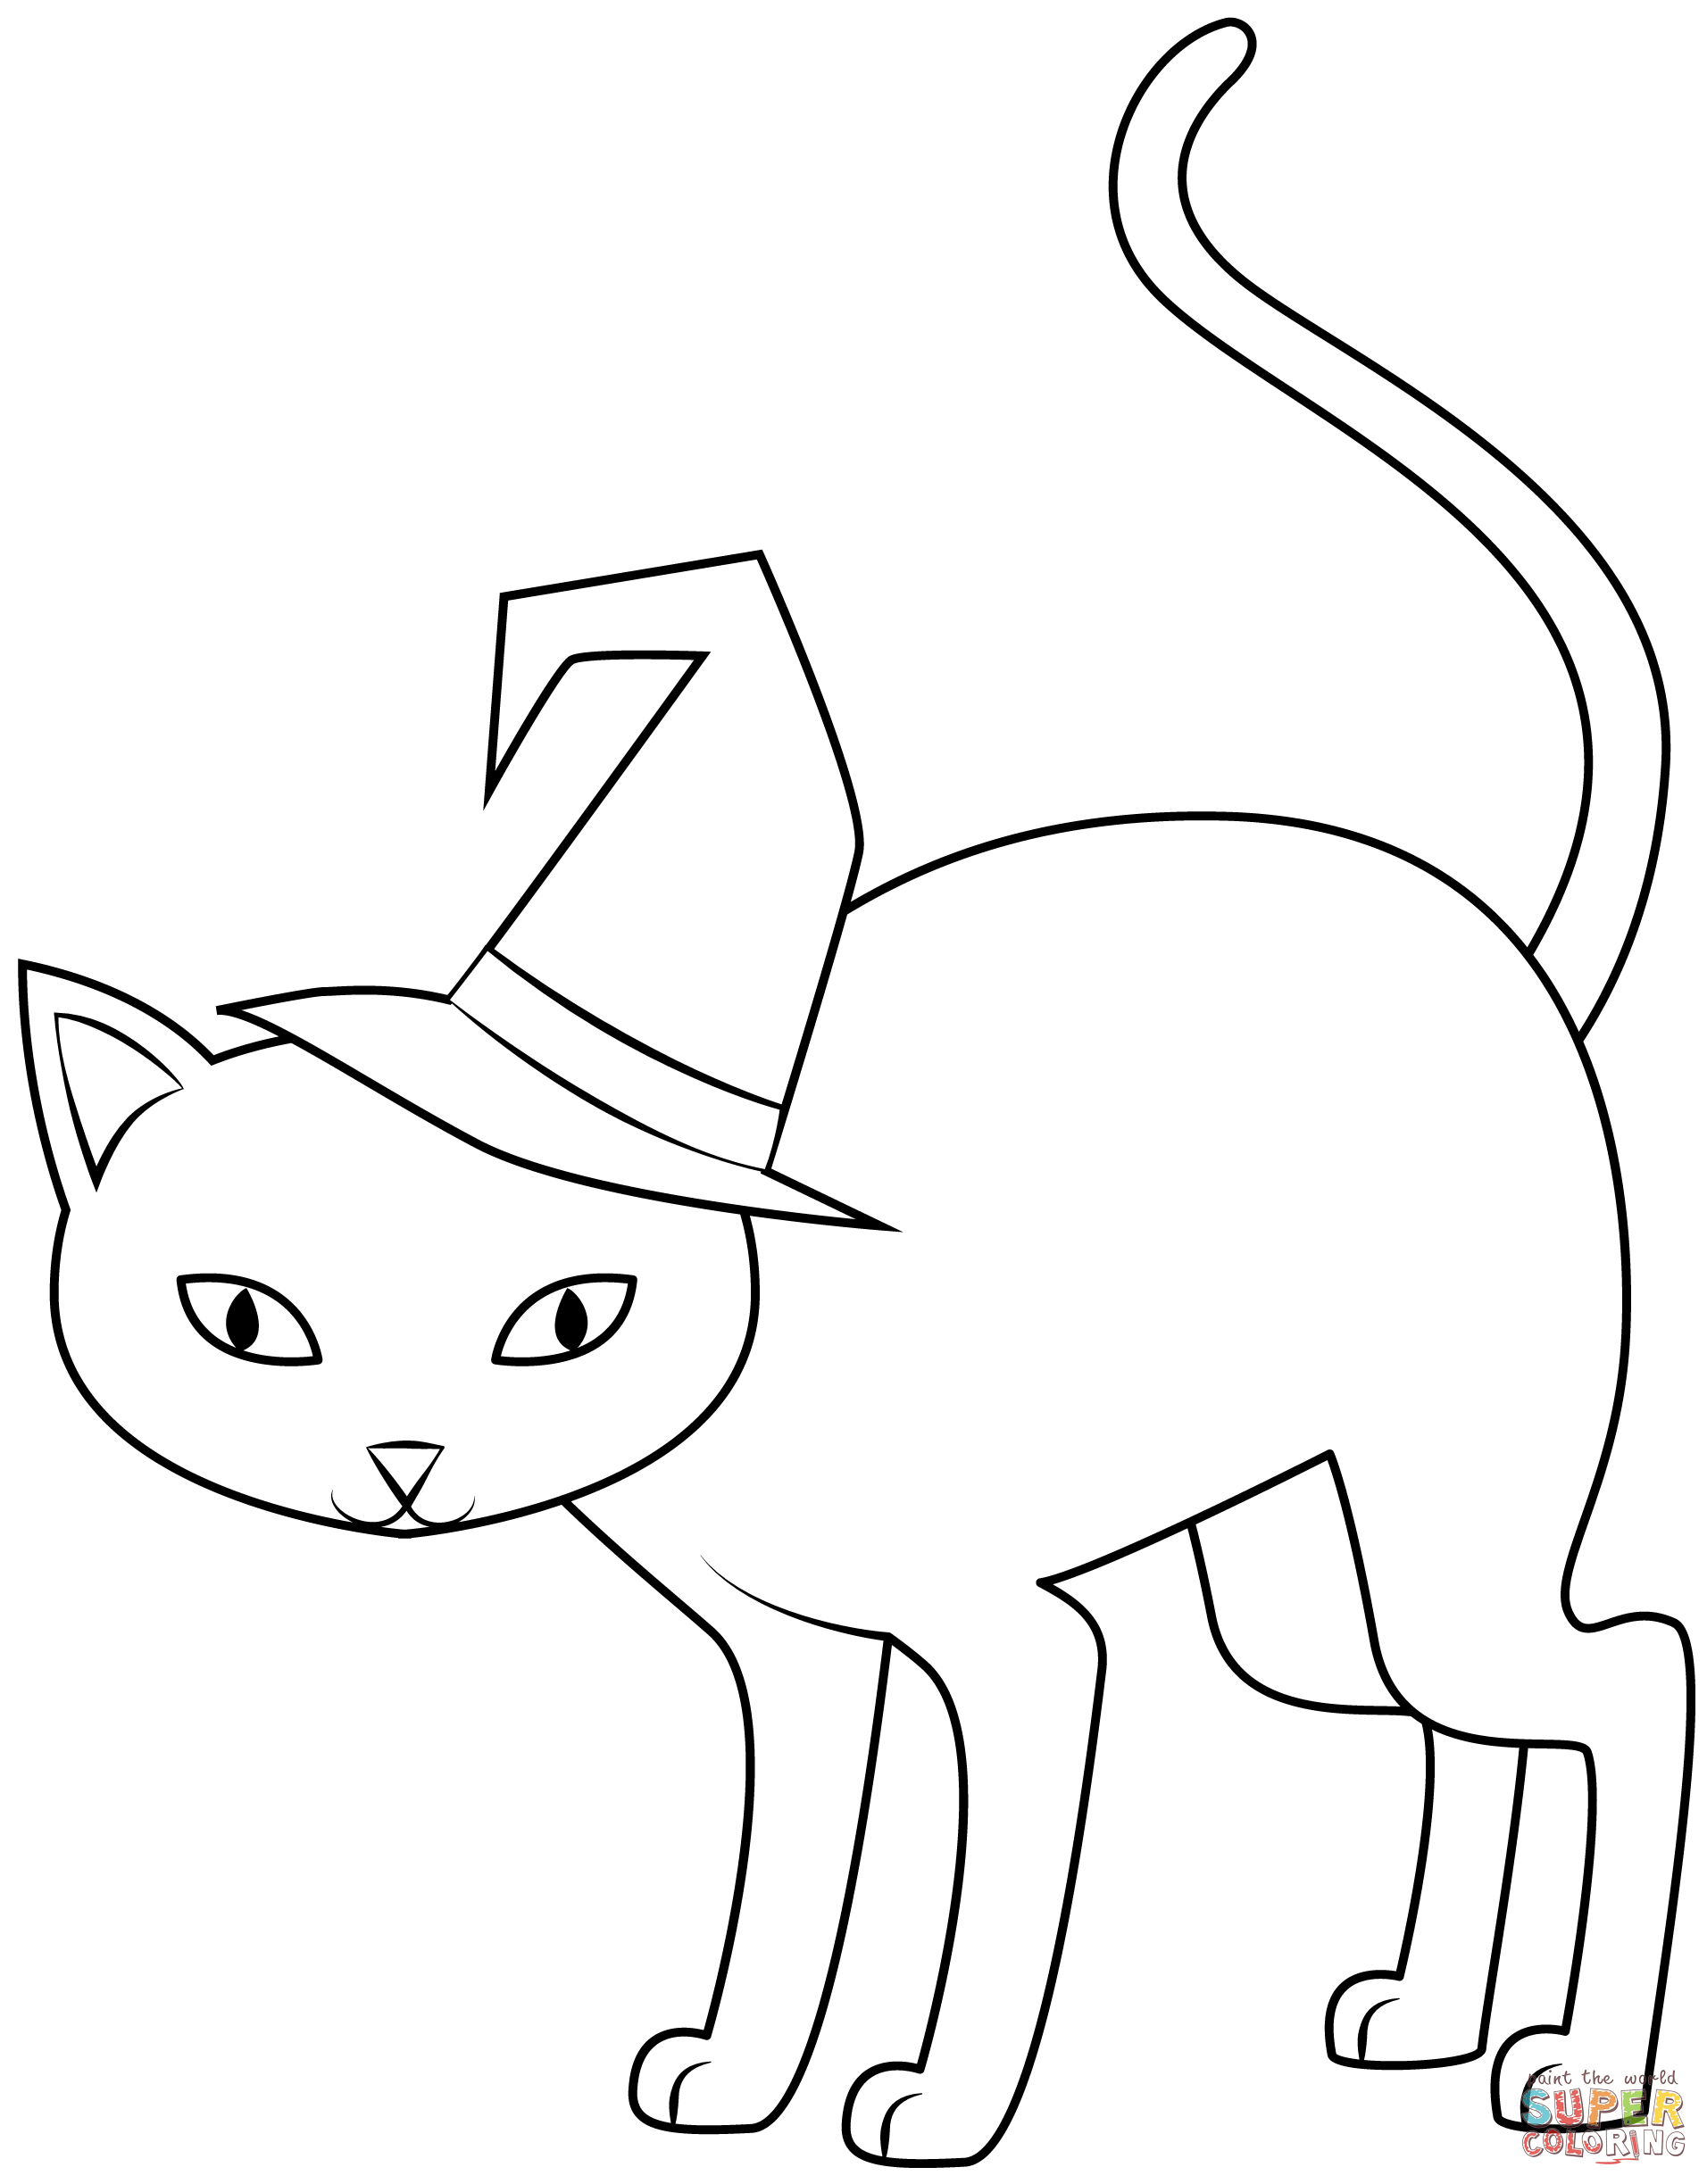 Halloween cat coloring page free printable coloring pages